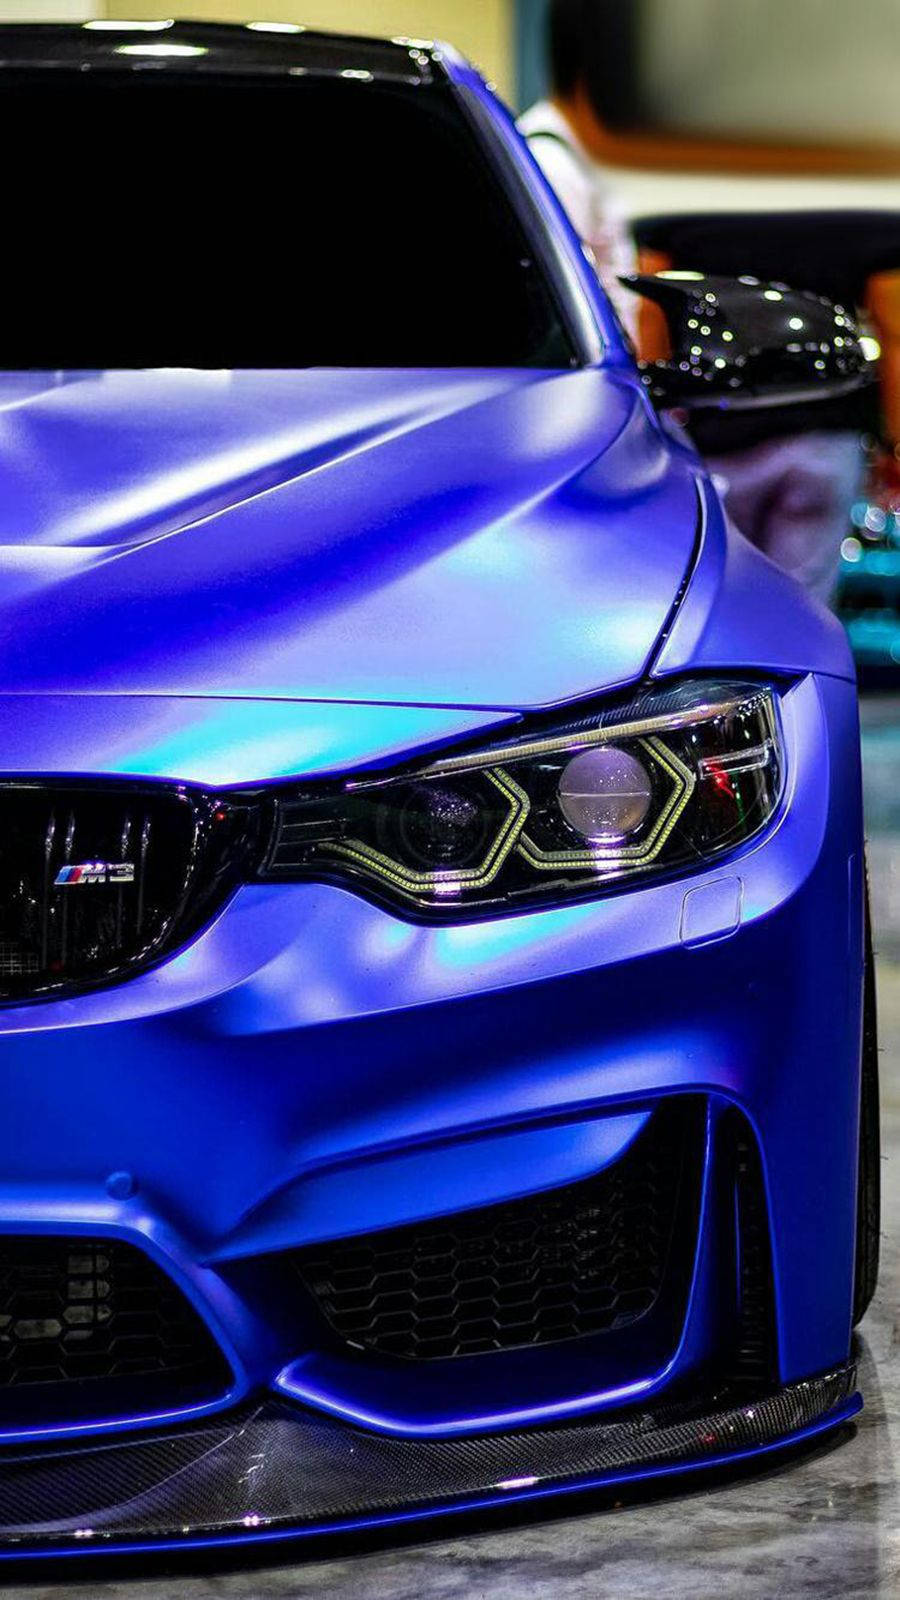 Well-Polished Blue BMW Wallpaper